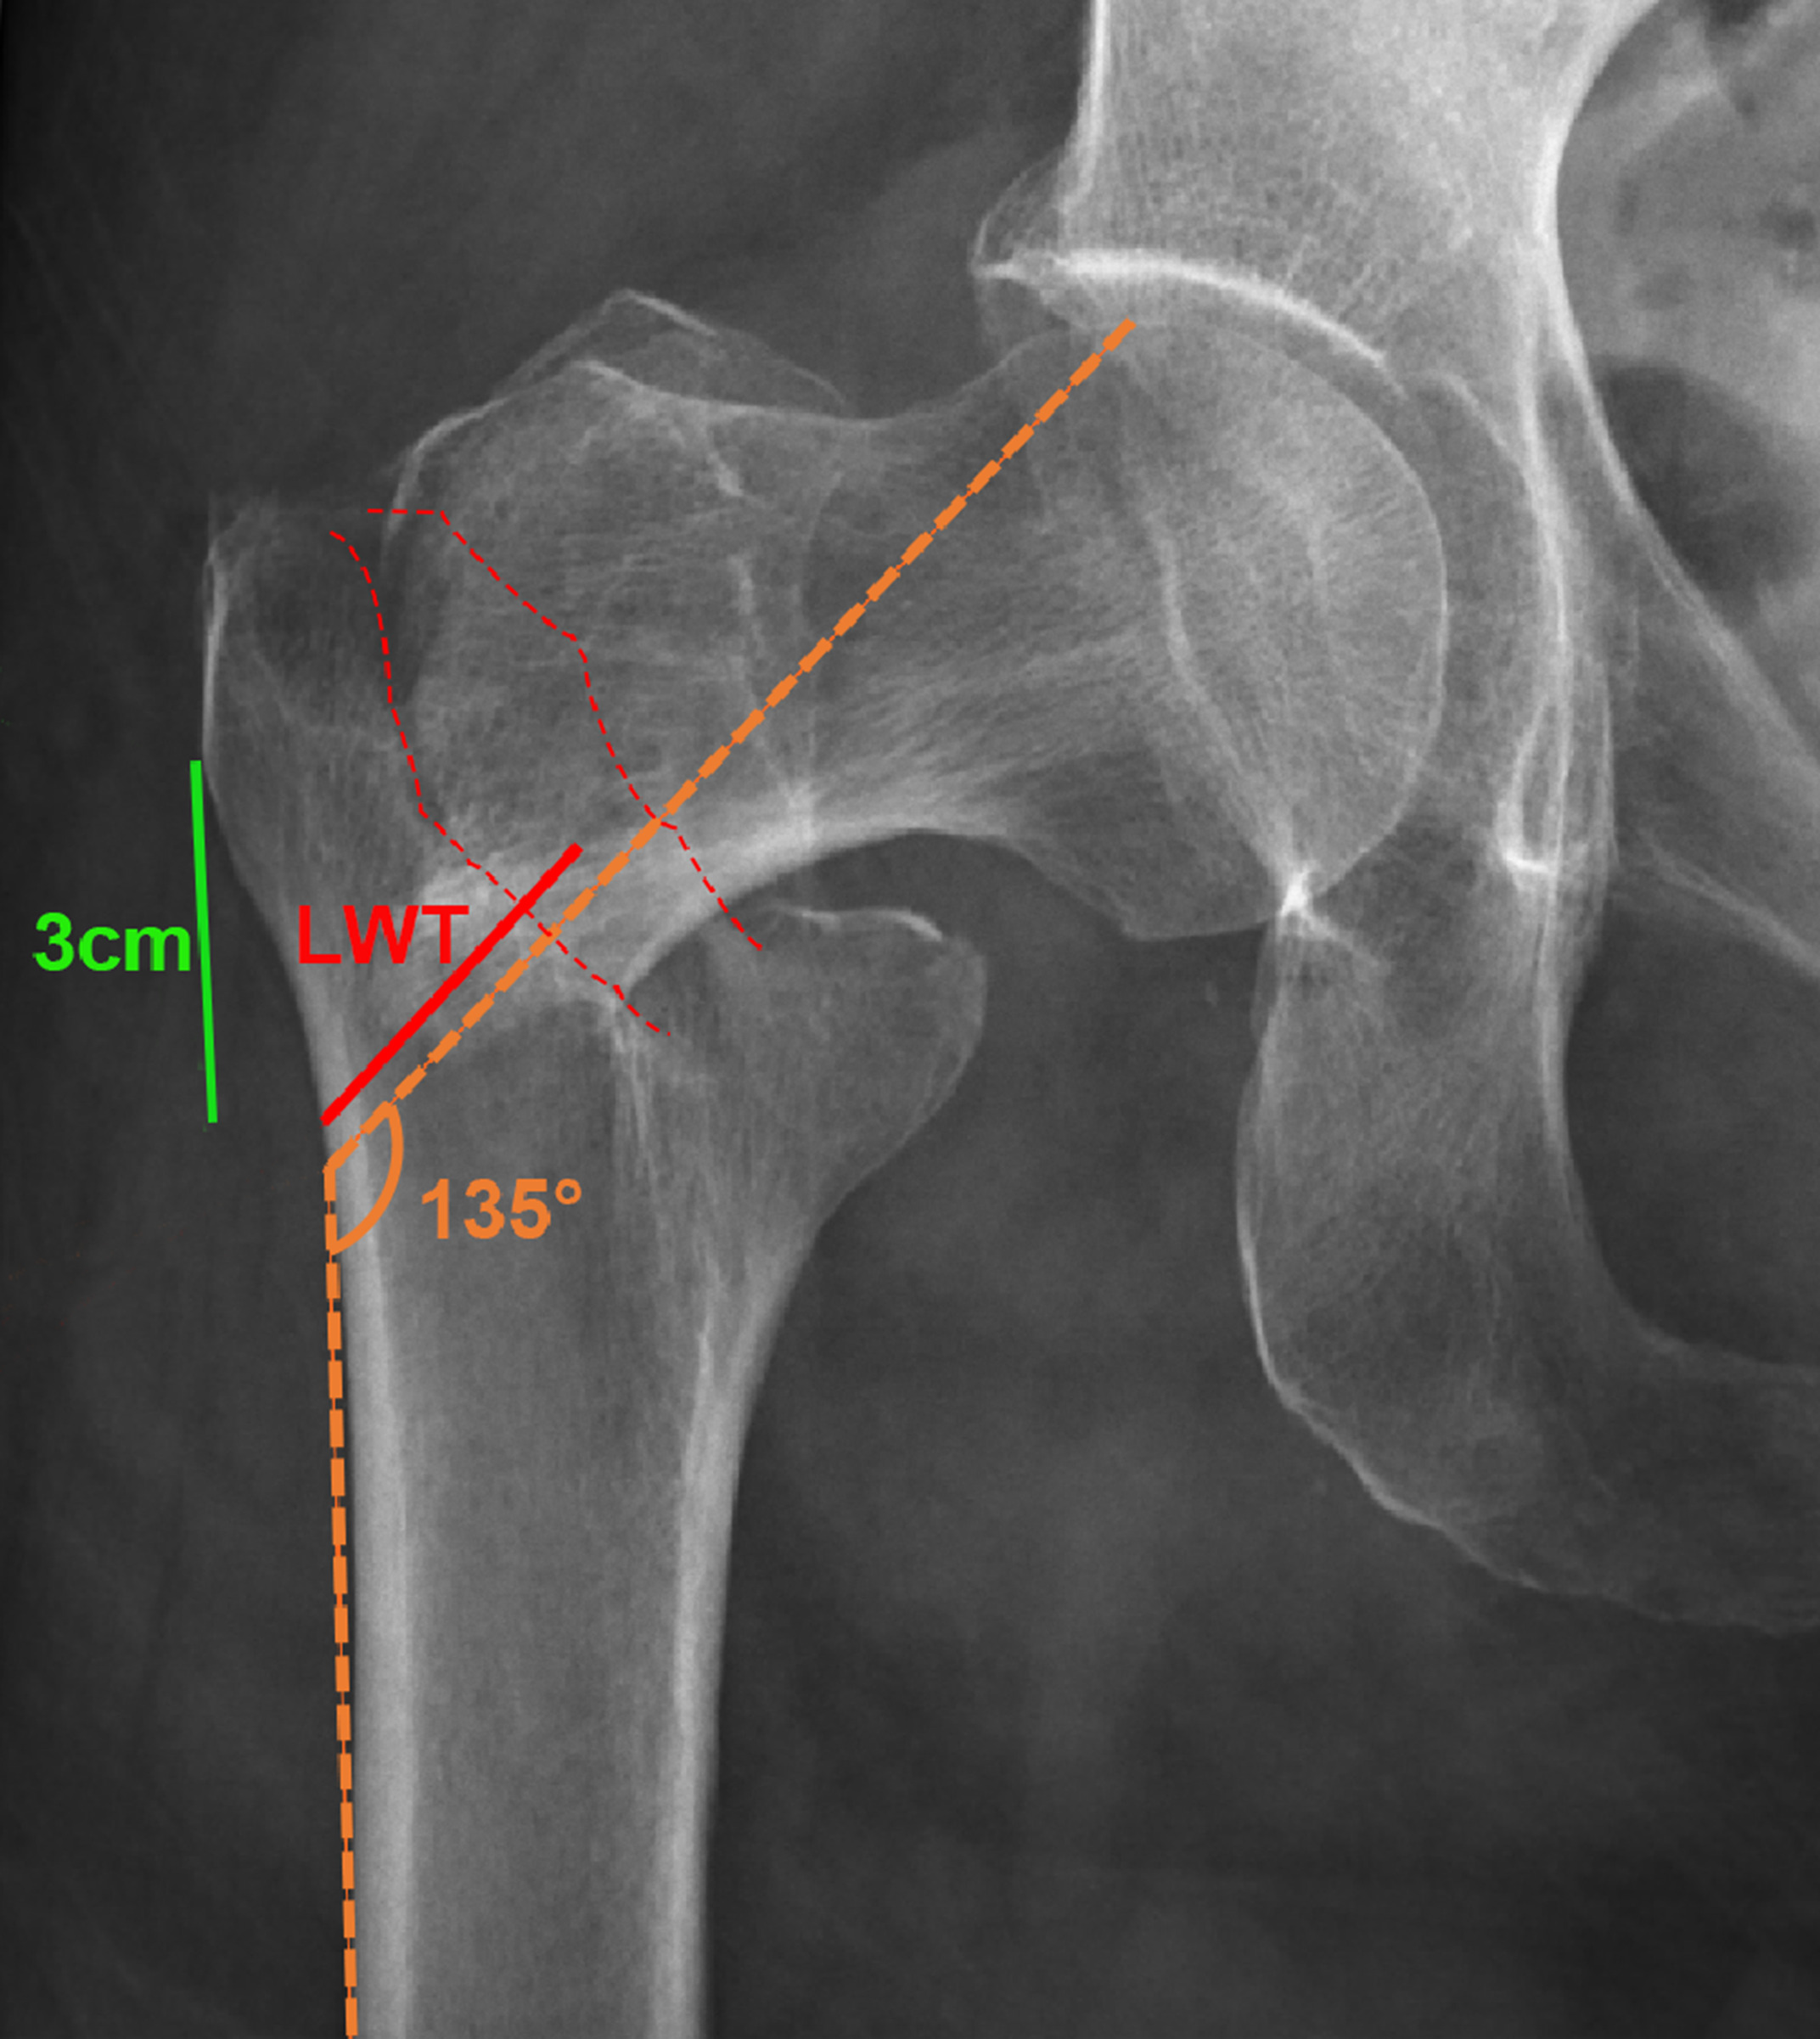 Fig. 1 
            Lateral femoral wall thickness (LWT) measuring. LWT (red solid line) is determined by measuring the distance from a reference point 3 cm (green line) below innominate tubercle of greater trochanter, using an angled approach of 135° until reaching the fracture line (the mid-line between the two cortex lines (red dashed line)) on anteroposterior radiograph.
          